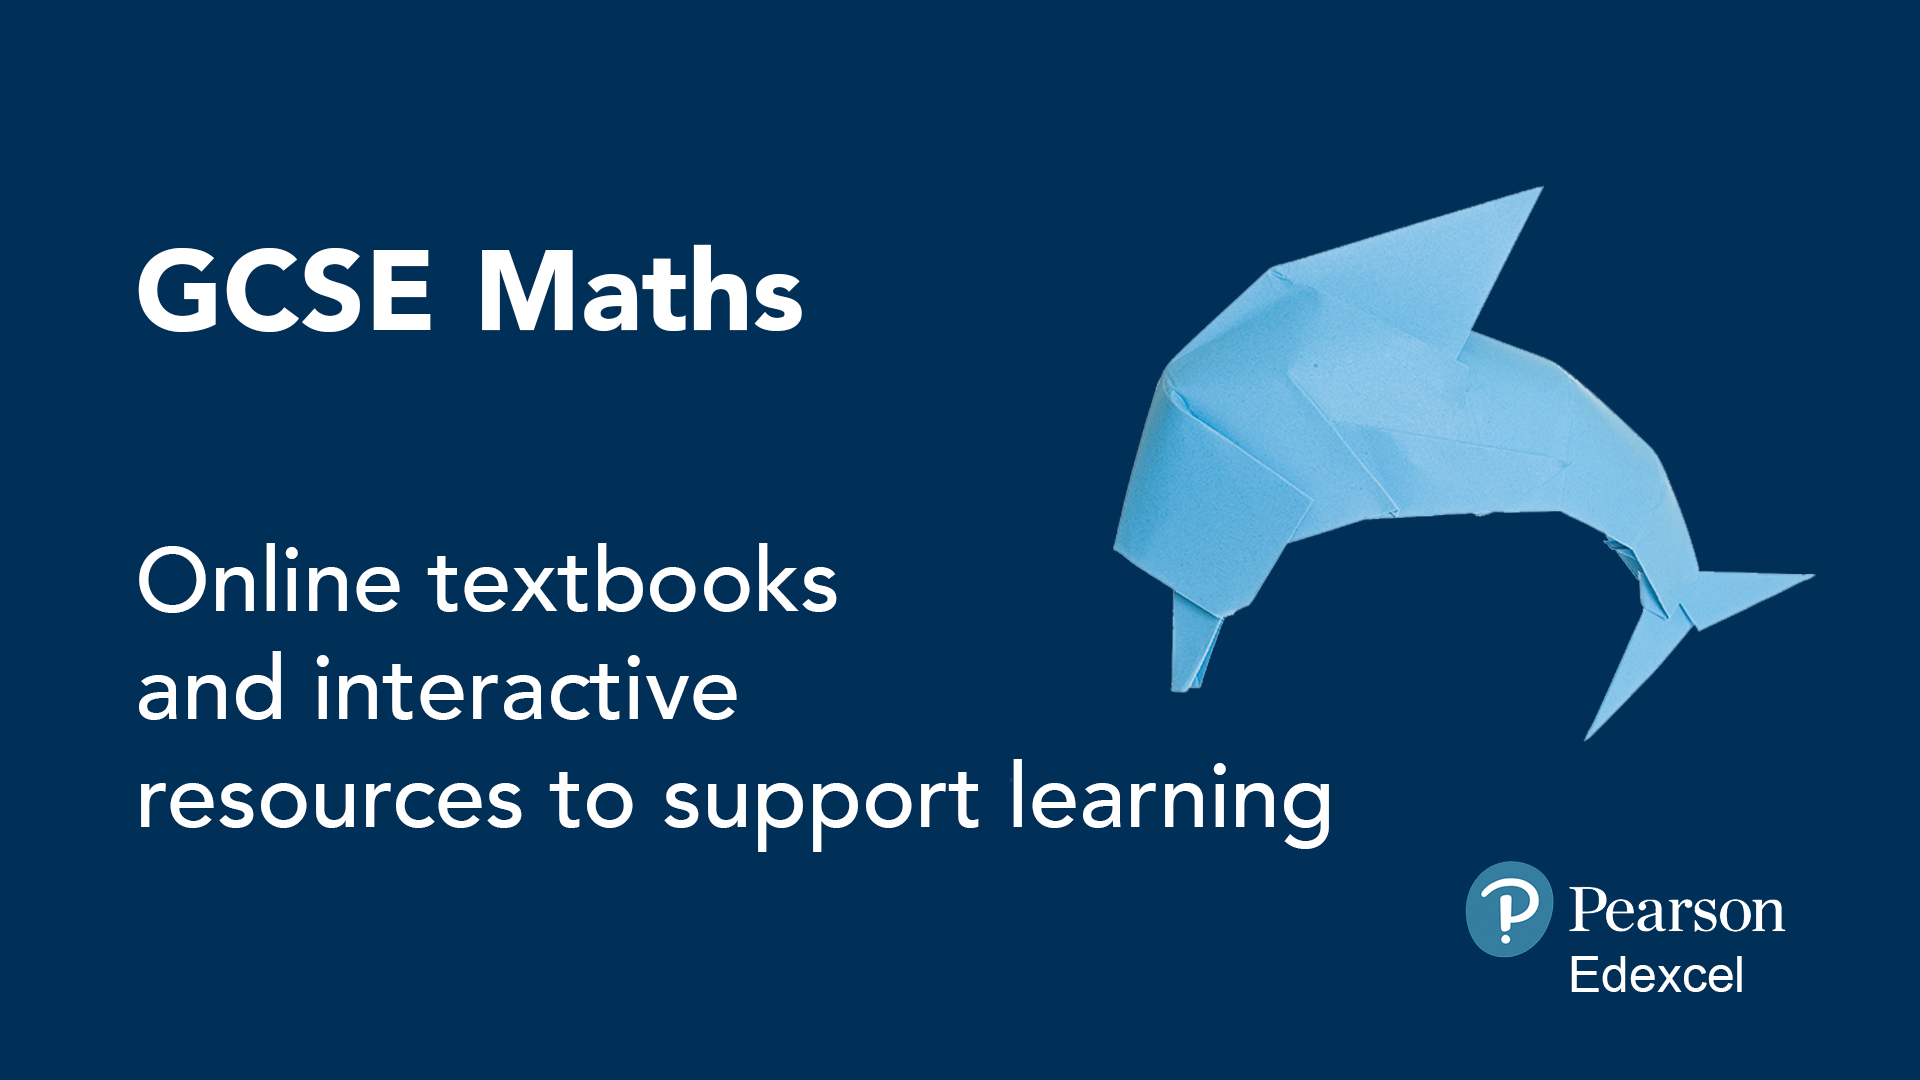 GCSE Maths: Online textbooks and interactive resources to support learning